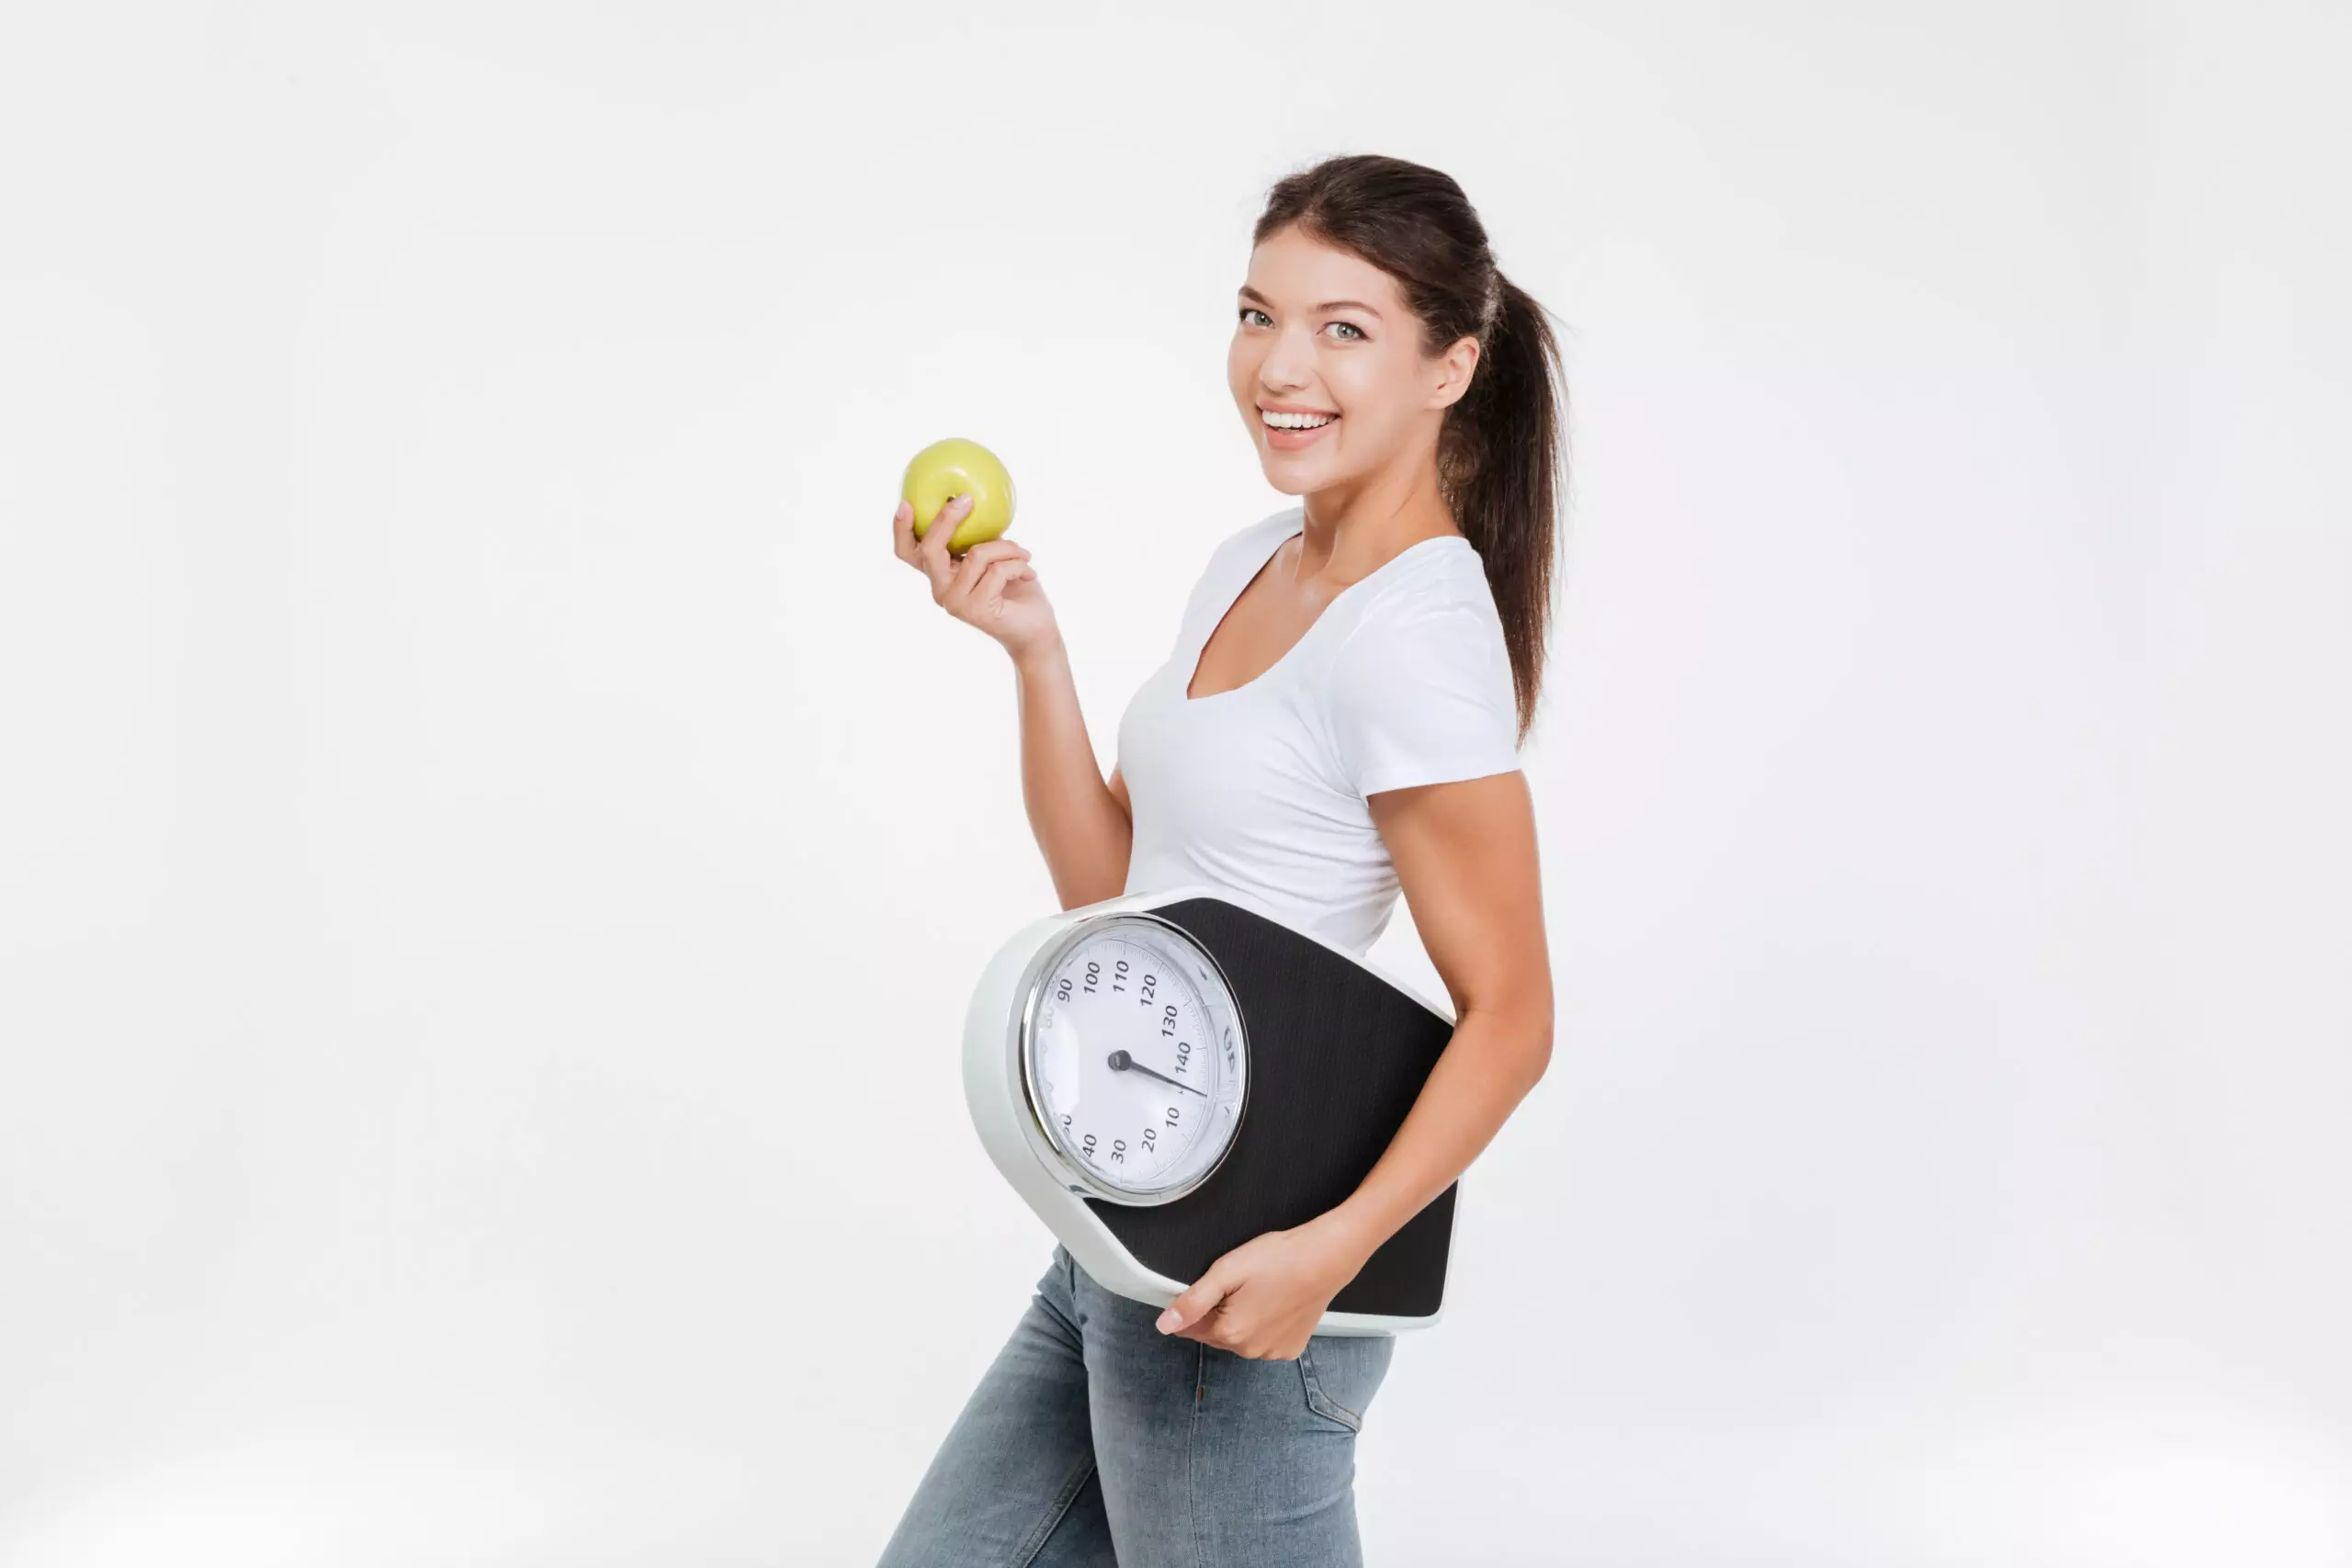 Woman holding apple and scale, promoting healthy lifestyle.